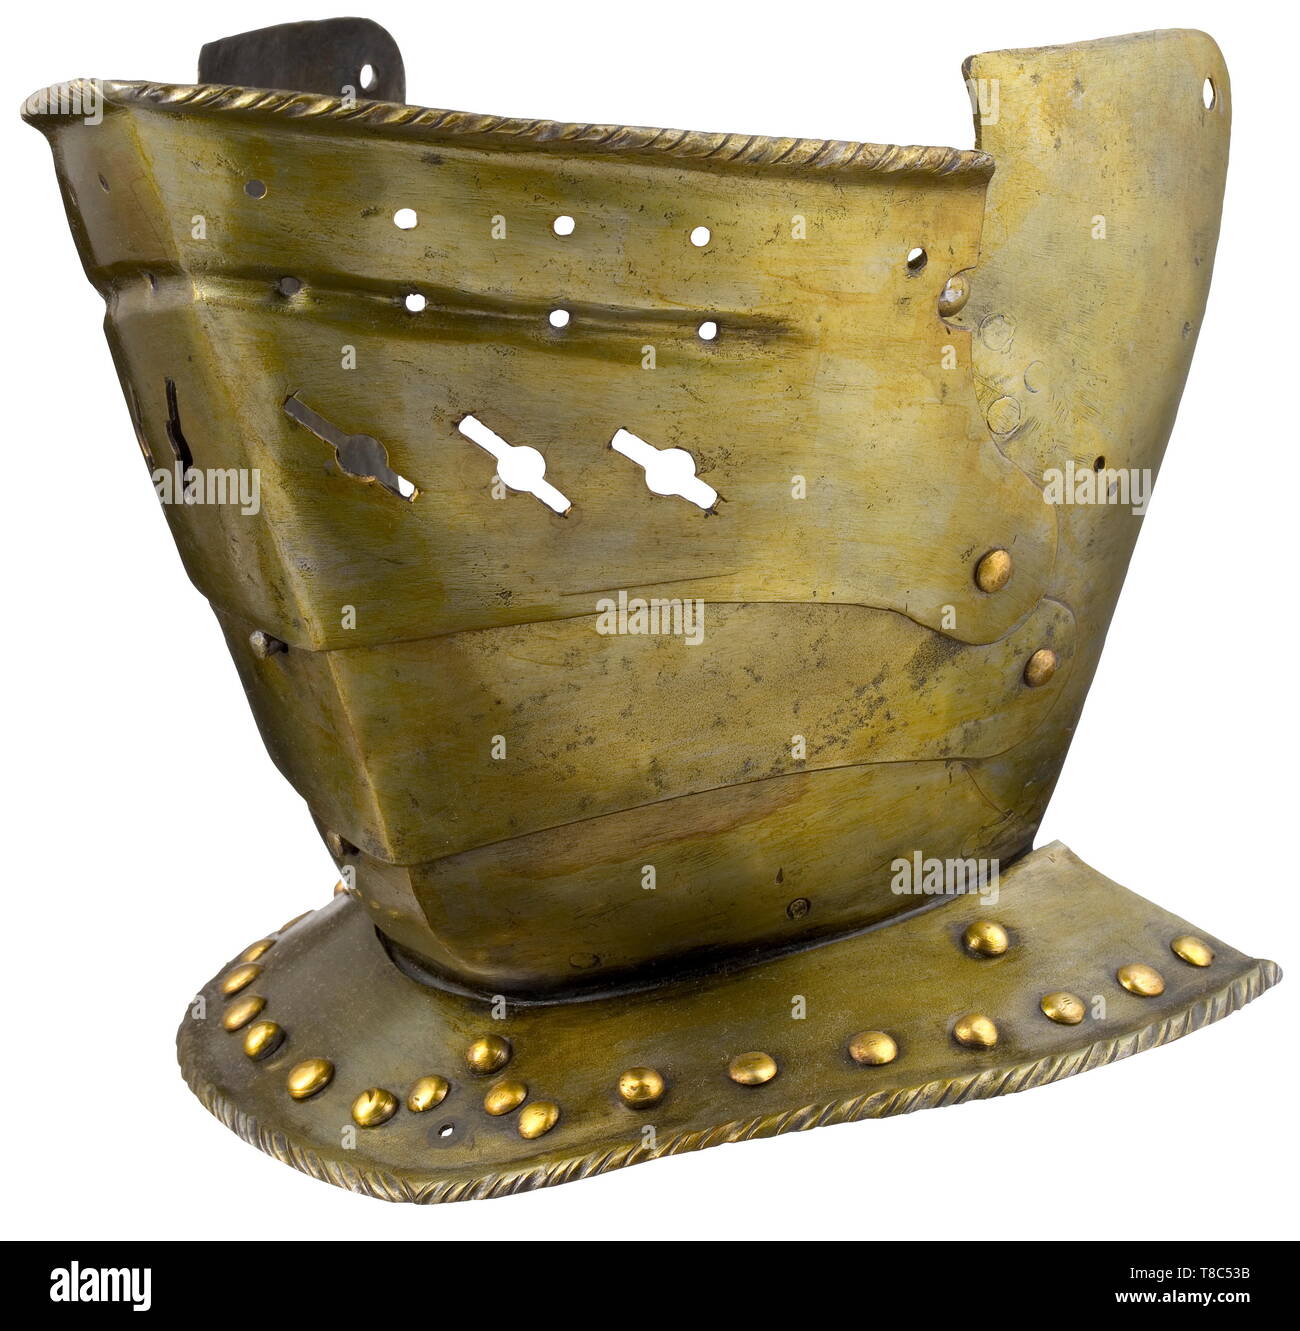 A German pivoted visor, circa 1580 Visor for a light-weight close helmet, assembled from old parts. The face guard sliding on two lames with spring-loaded bolt lock. The upper plate with finely turned-under and roped edge as well as dot-shaped and slotted ventilation holes. The bevor with holes for the hinges on the sides, the right side with suspension loop for a hook-and-eye closure (one old repair on the left lower edge). Collar plate with roped edge and decorations made from brass-plated rivets. Old, yellowed varnish. Height 23 cm. historic, , Additional-Rights-Clearance-Info-Not-Available Stock Photo